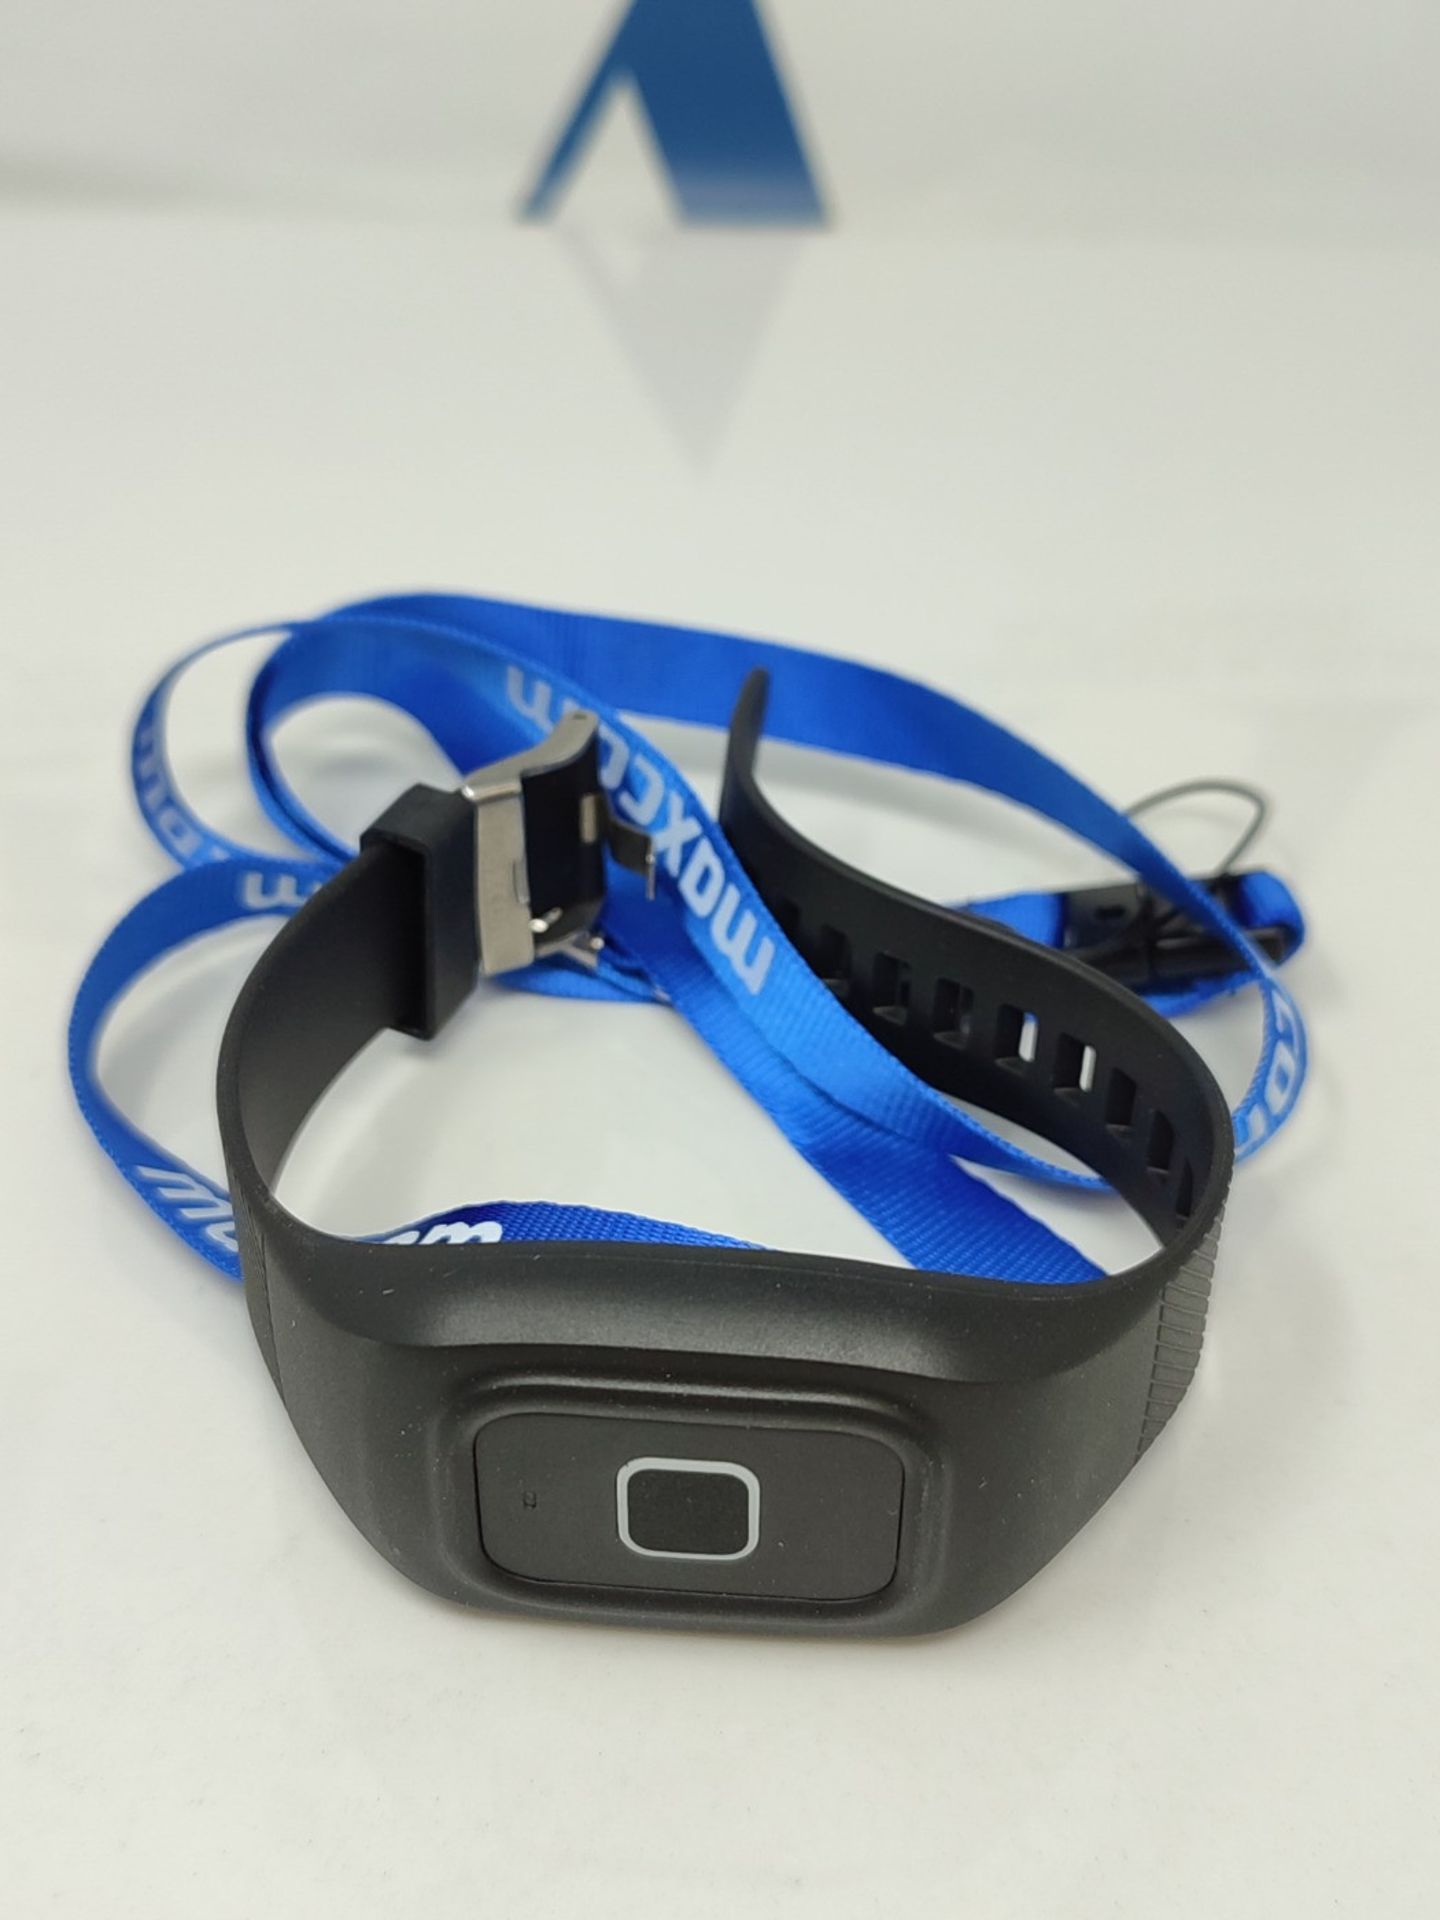 Maxcom FW735 - Emergency call bracelet for seniors, adults, with SOS emergency button, - Image 4 of 4